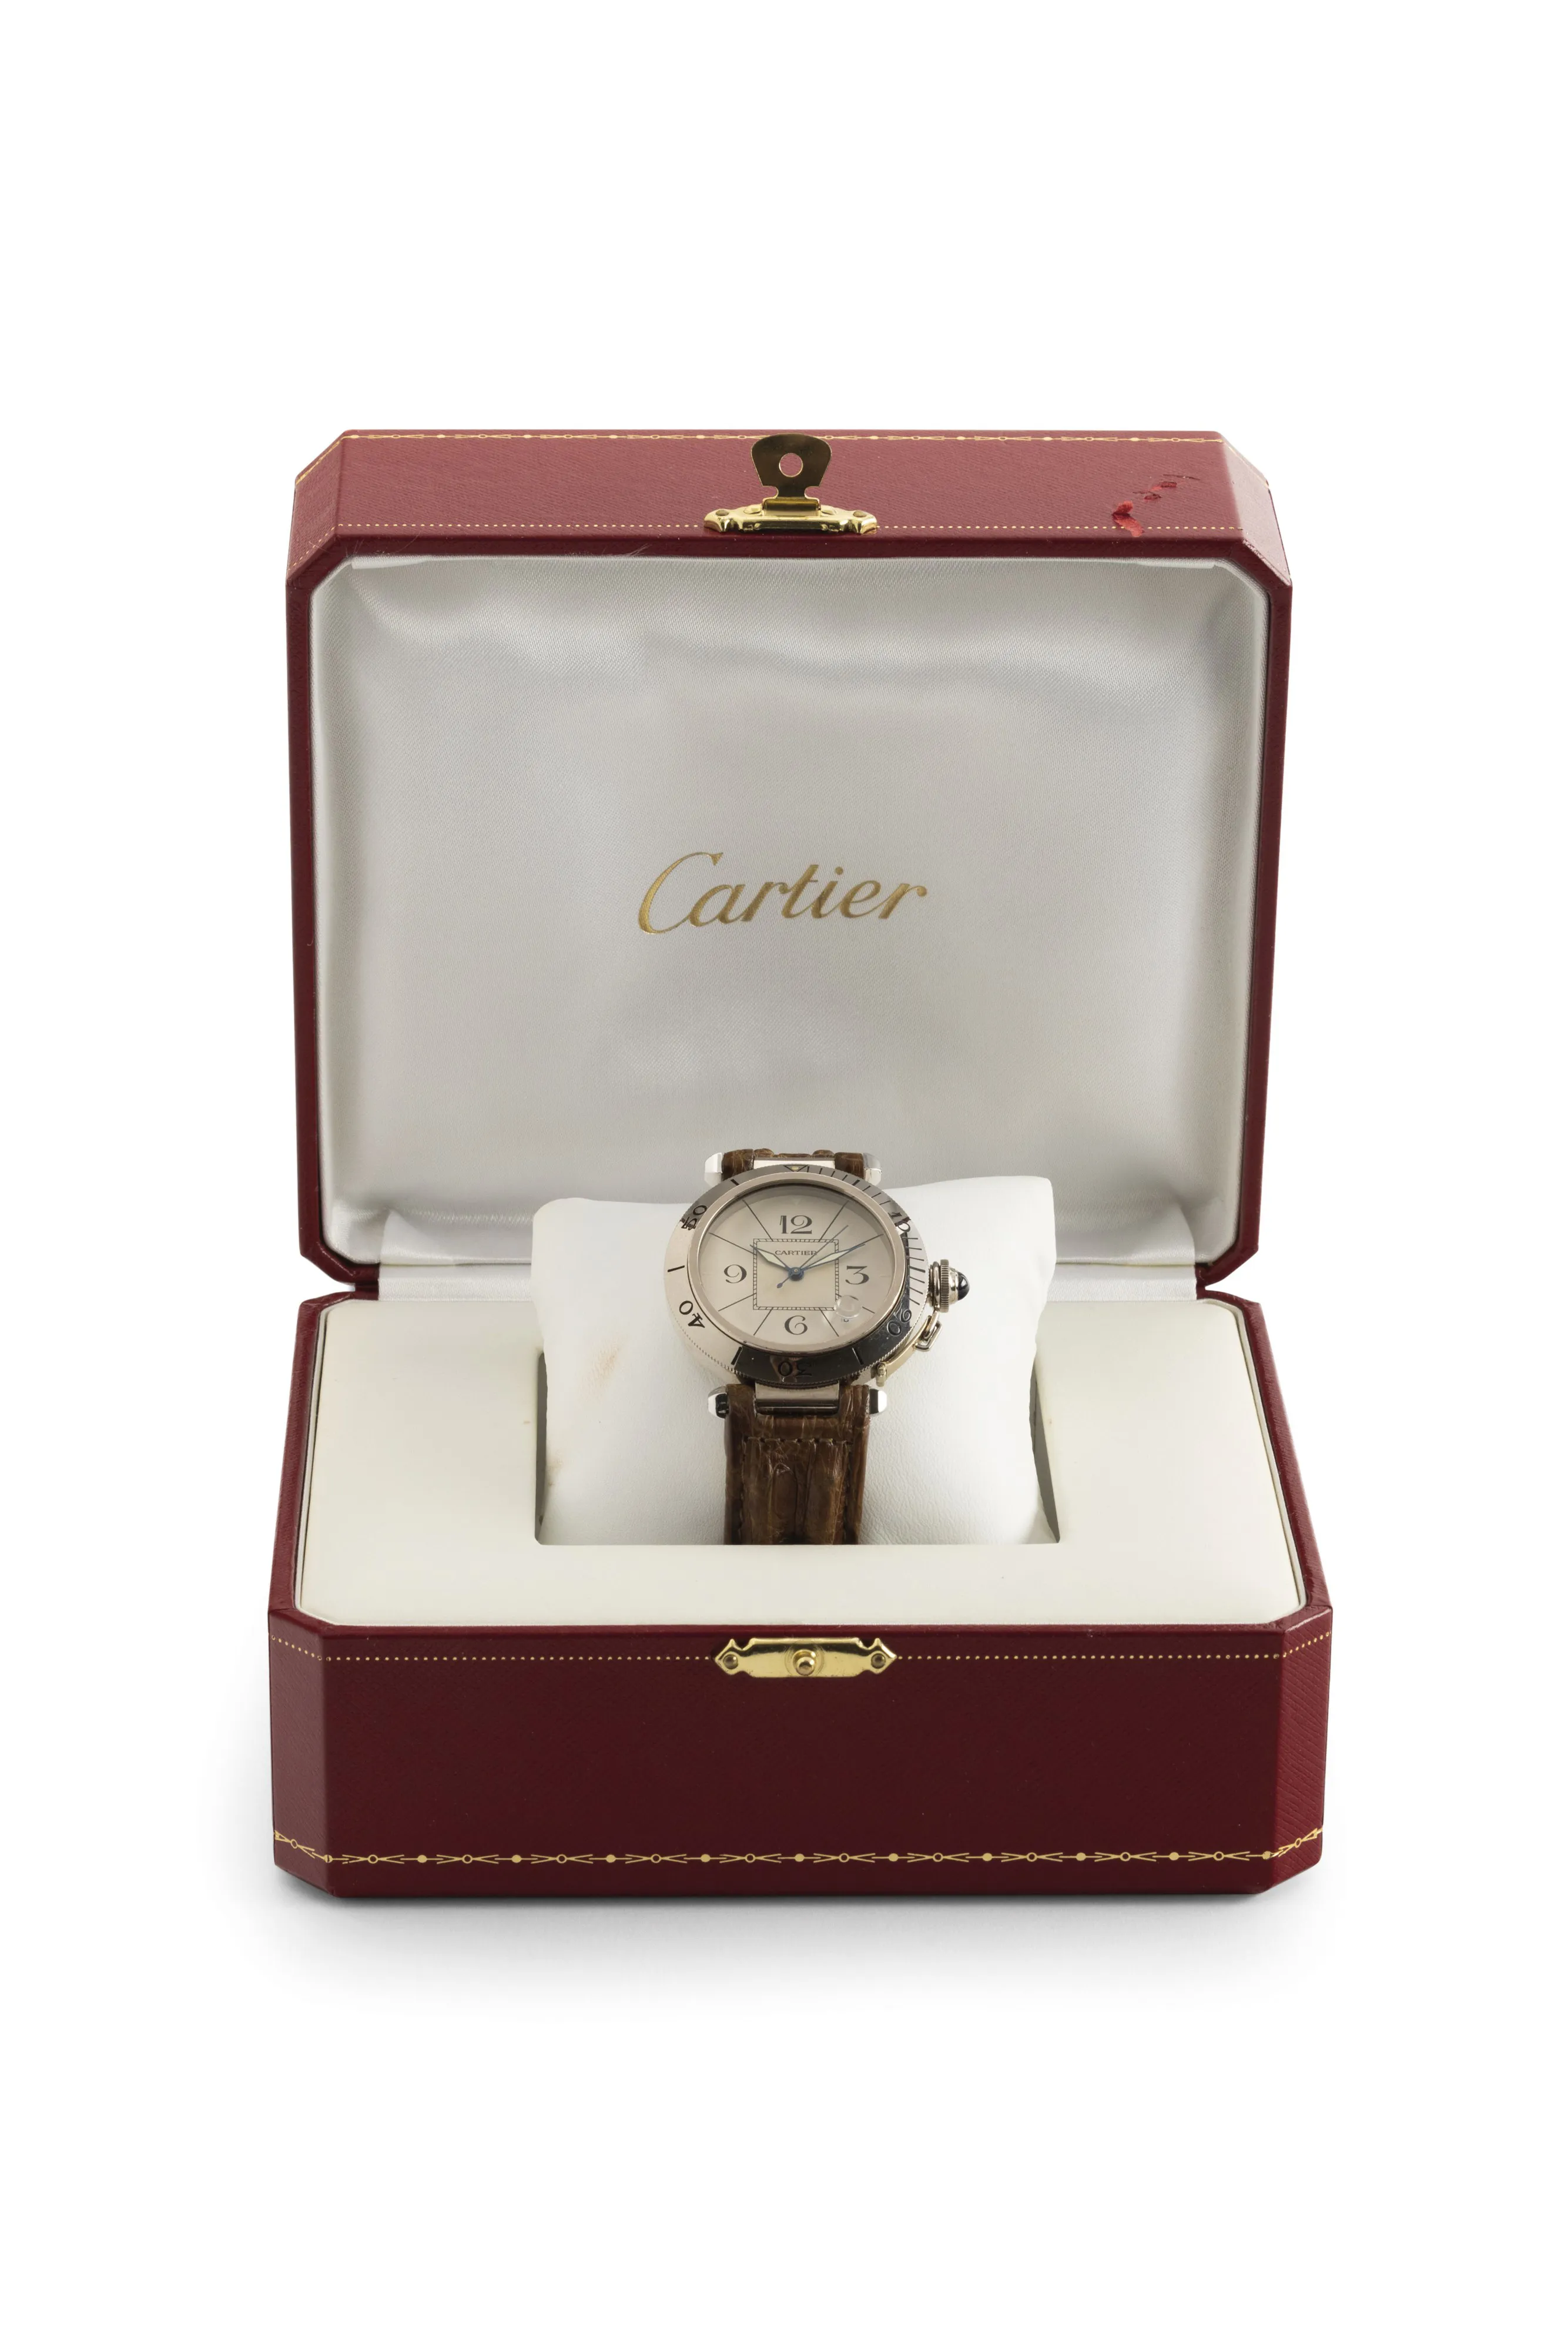 Cartier Pasha 1990 38mm White gold Silver 1